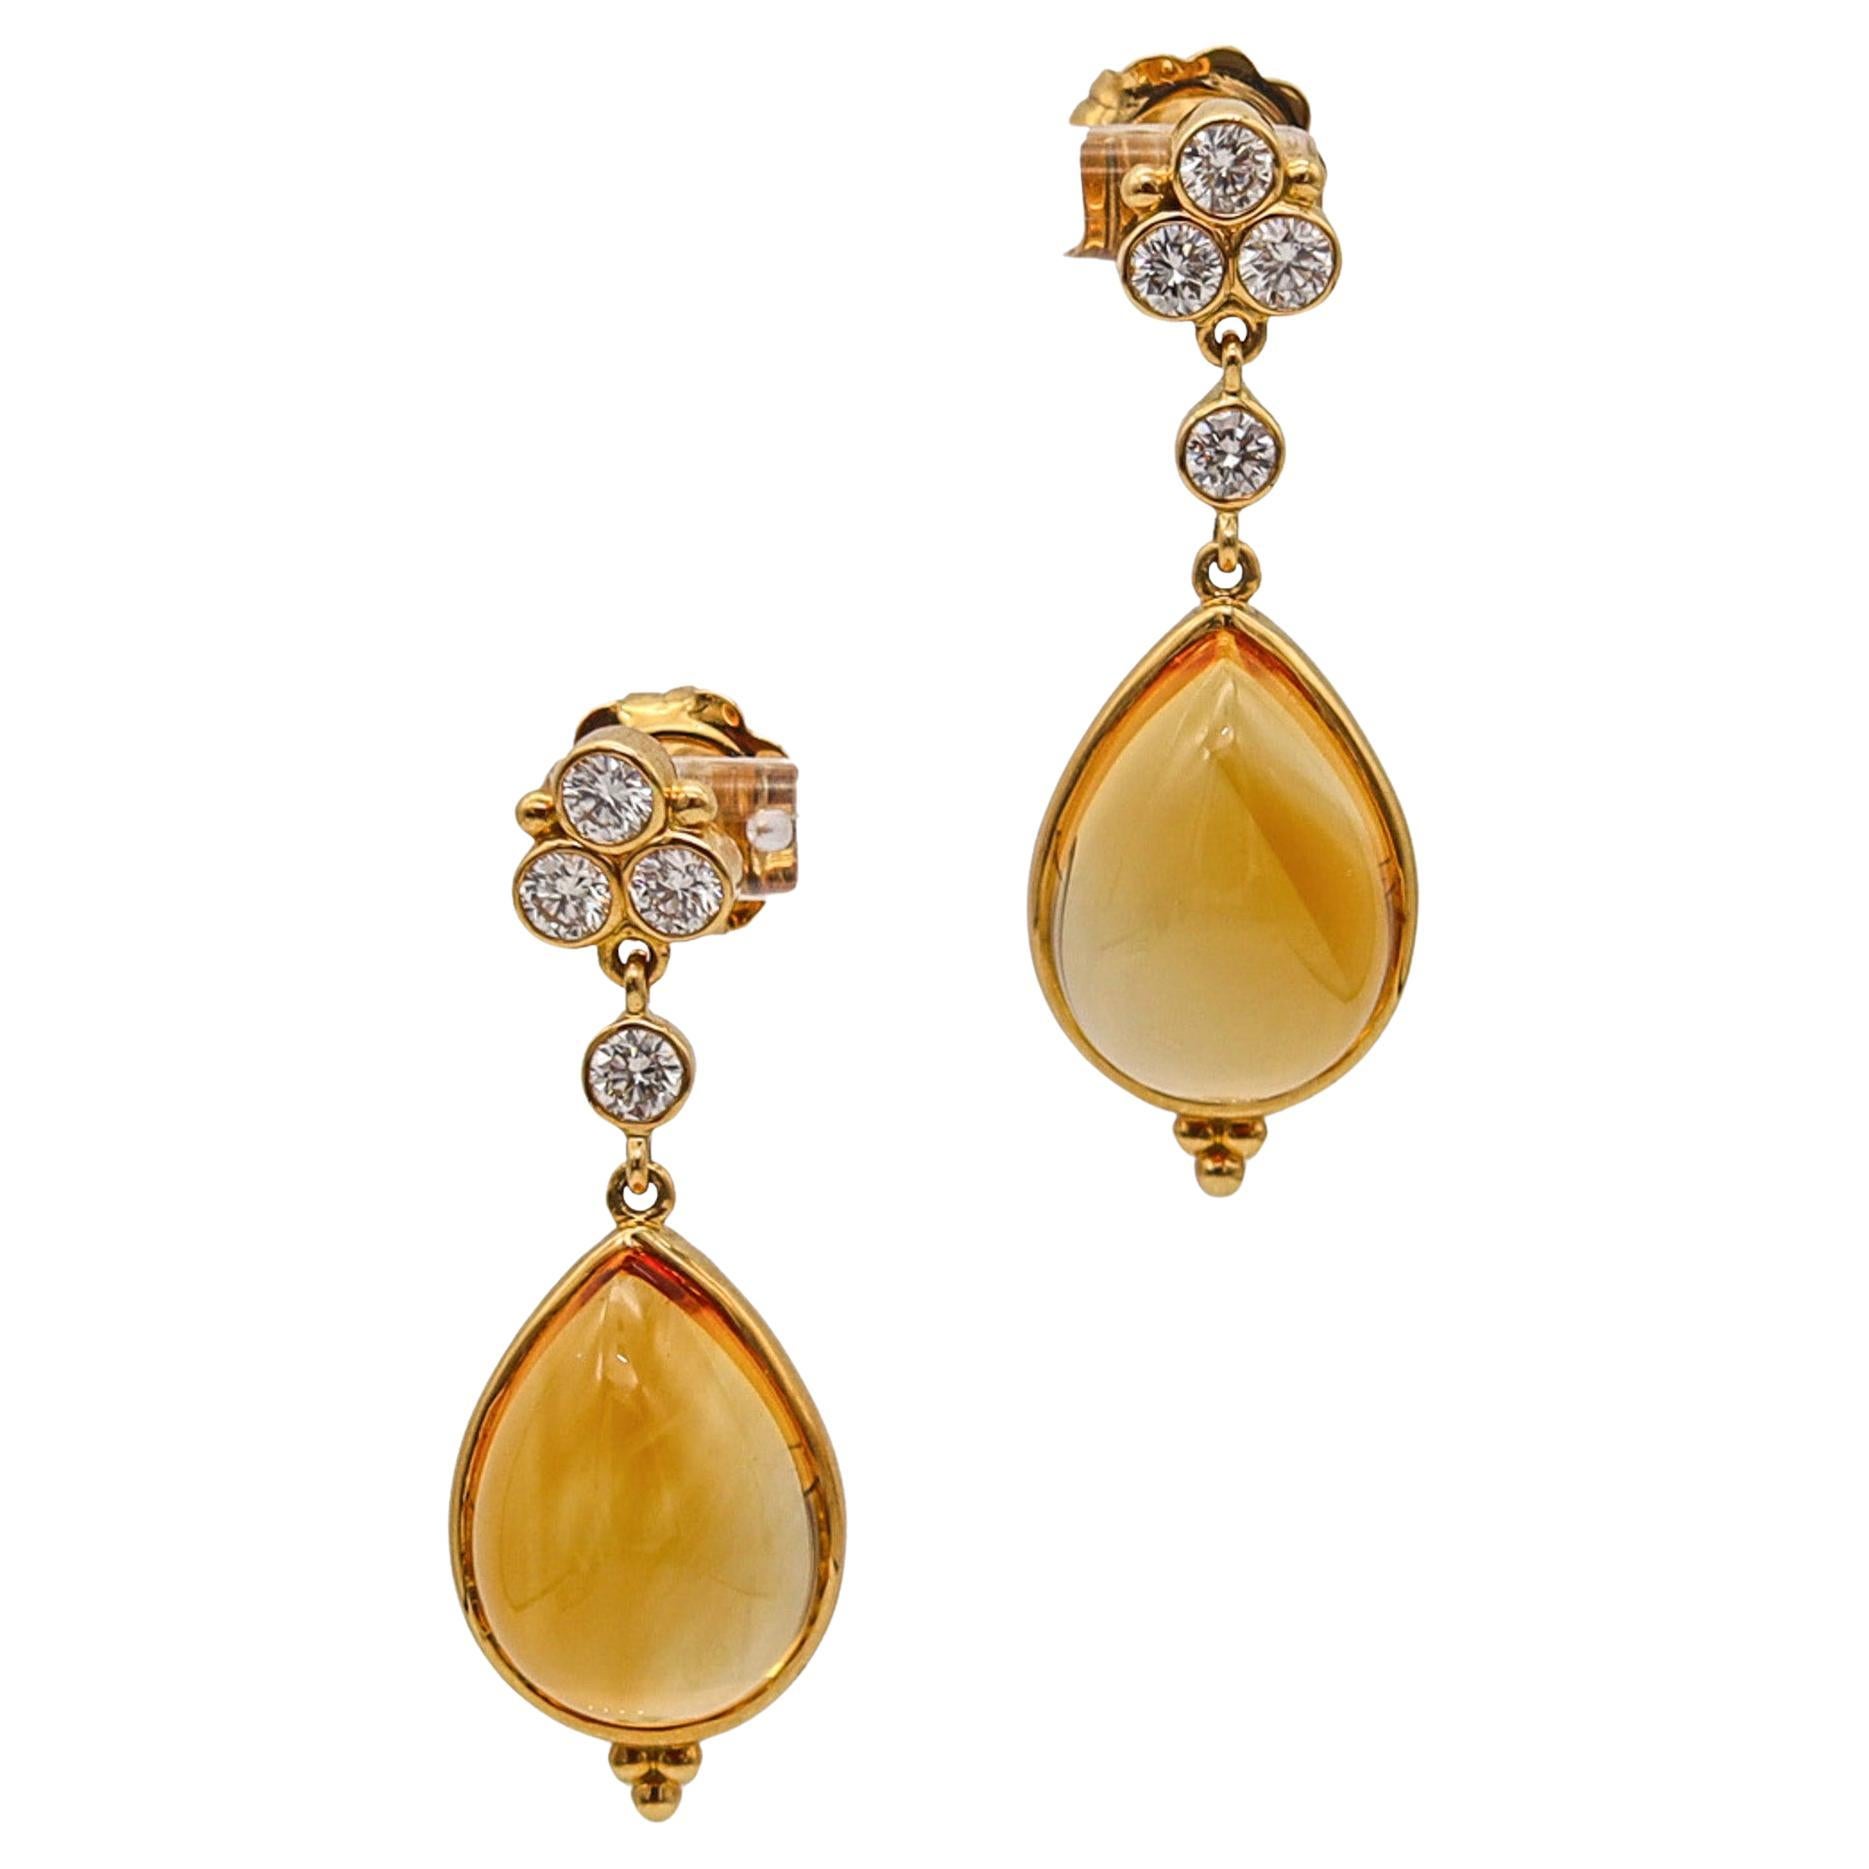 Temple St Clair Dangle Earrings In 18Kt Gold With 27.98 Ctw In Diamonds And Gems